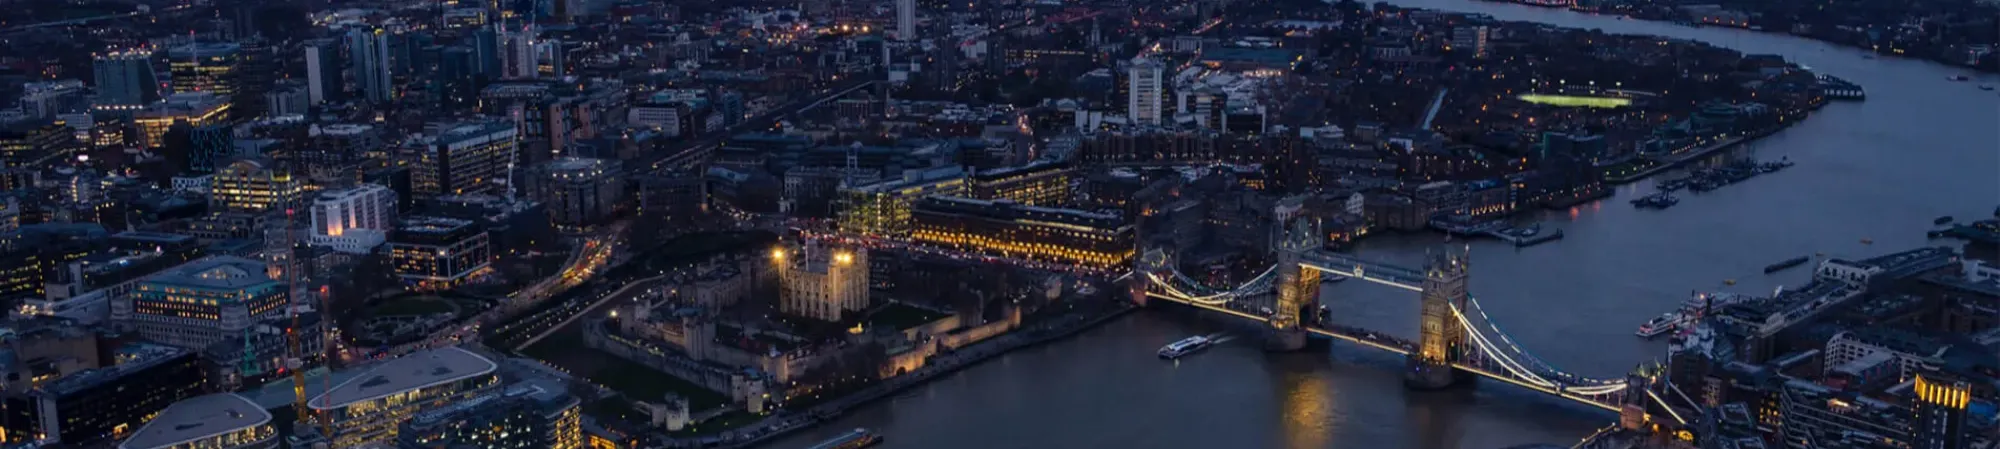 Ariel view of London at night with Tower Bridge and River Thames